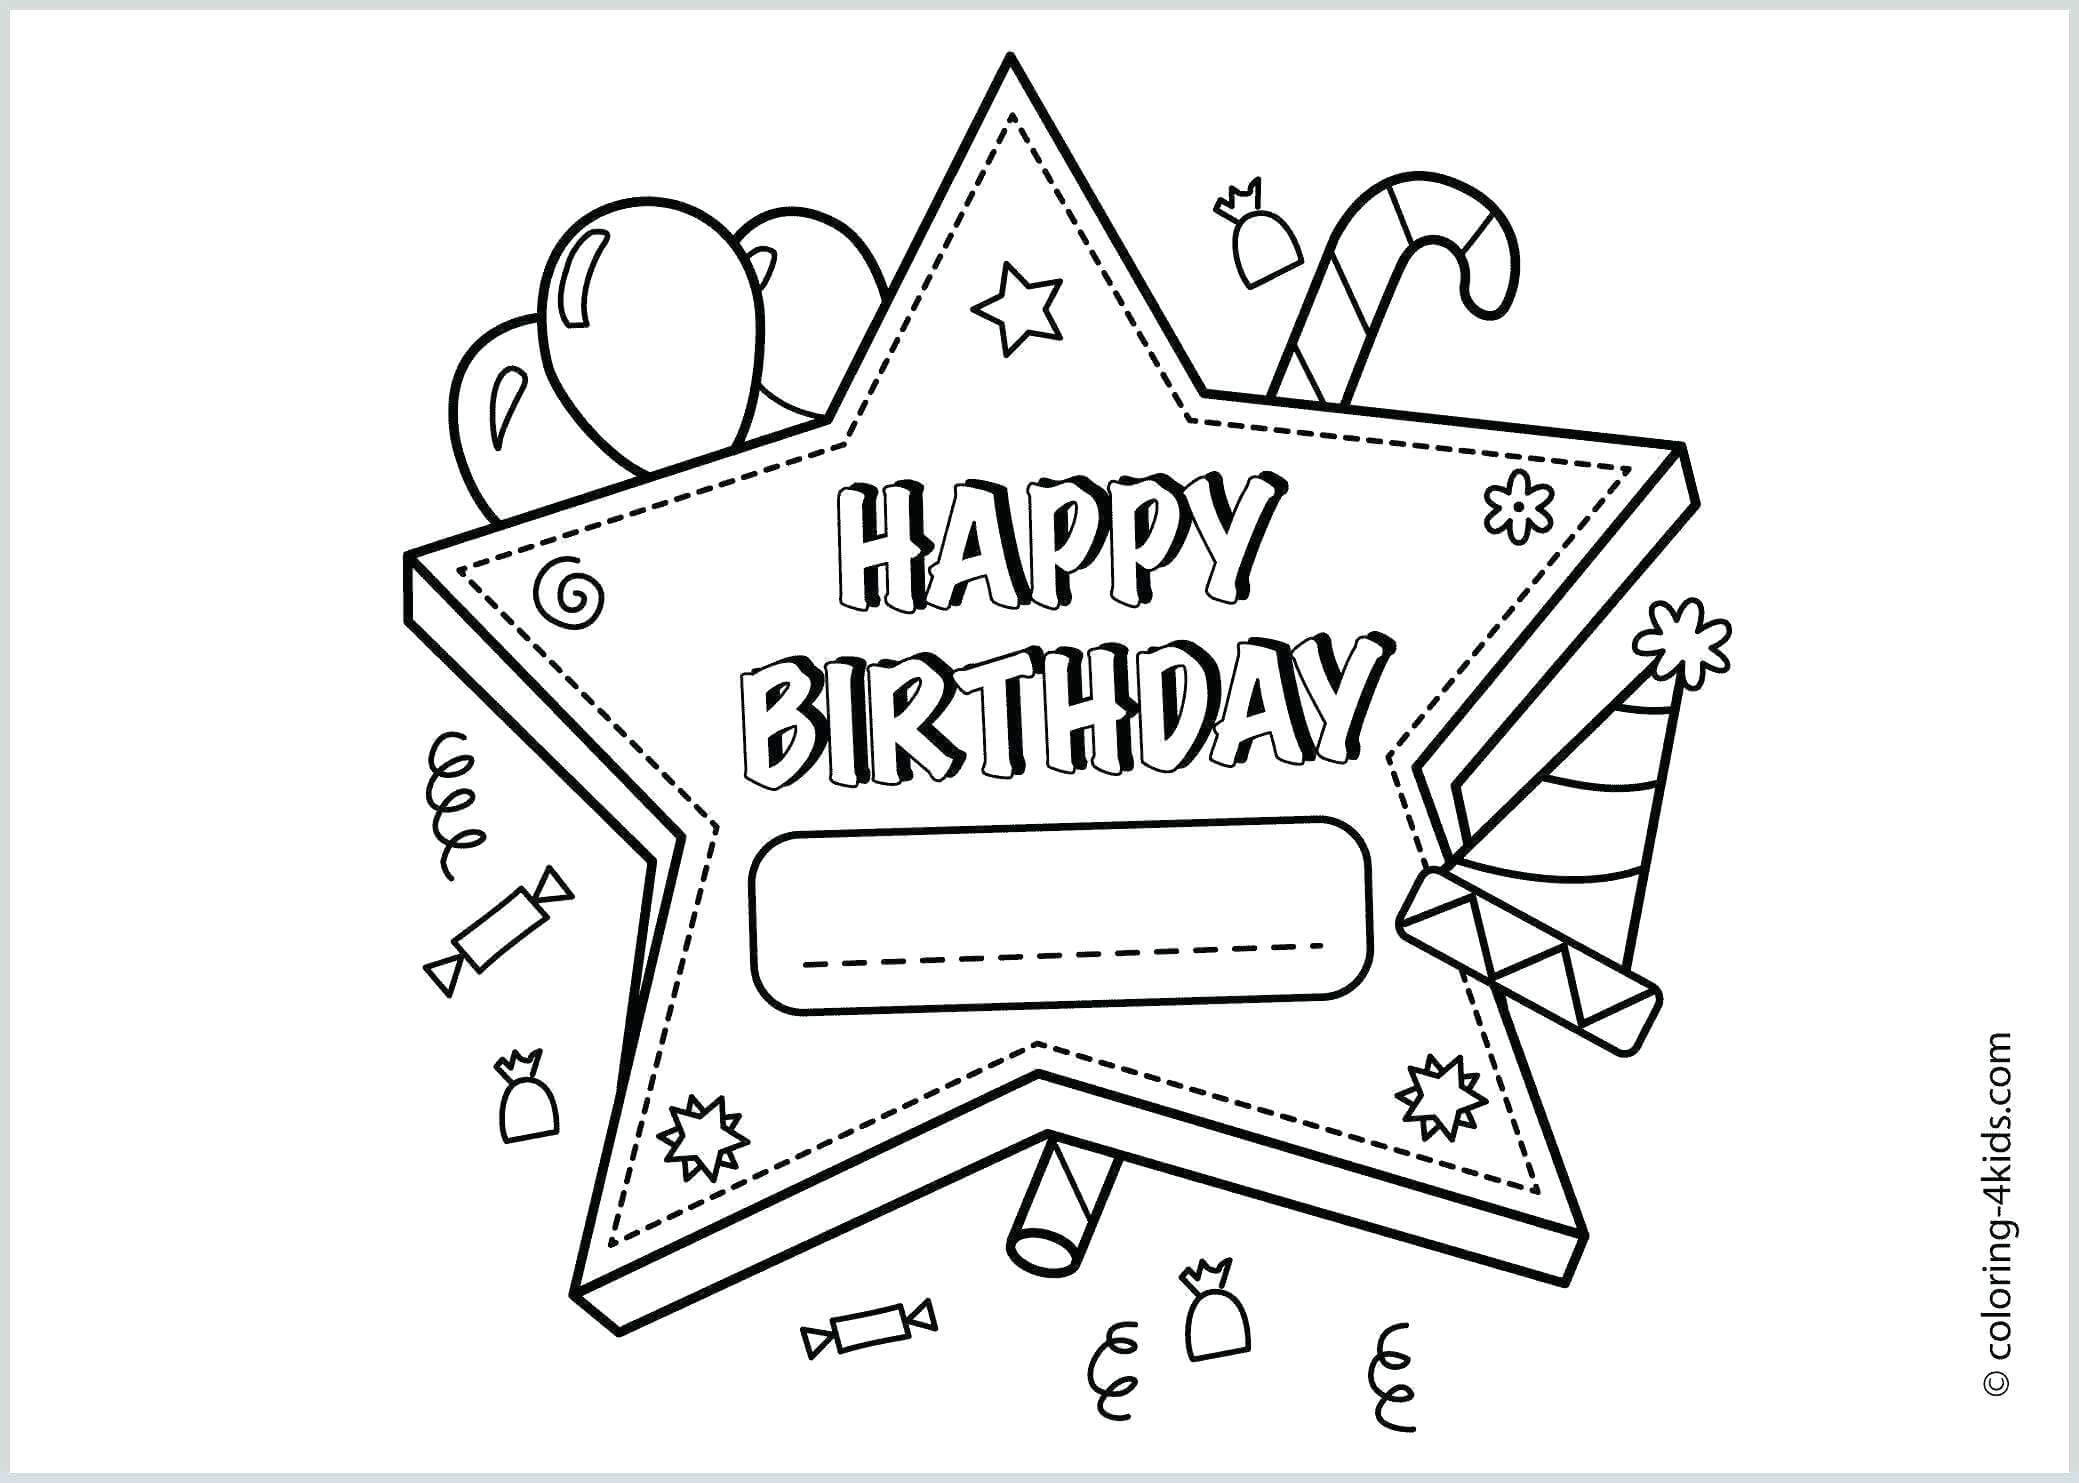 Coloring Pages : Coloring Printable Birthday Amazing Card With Template For Cards To Print Free